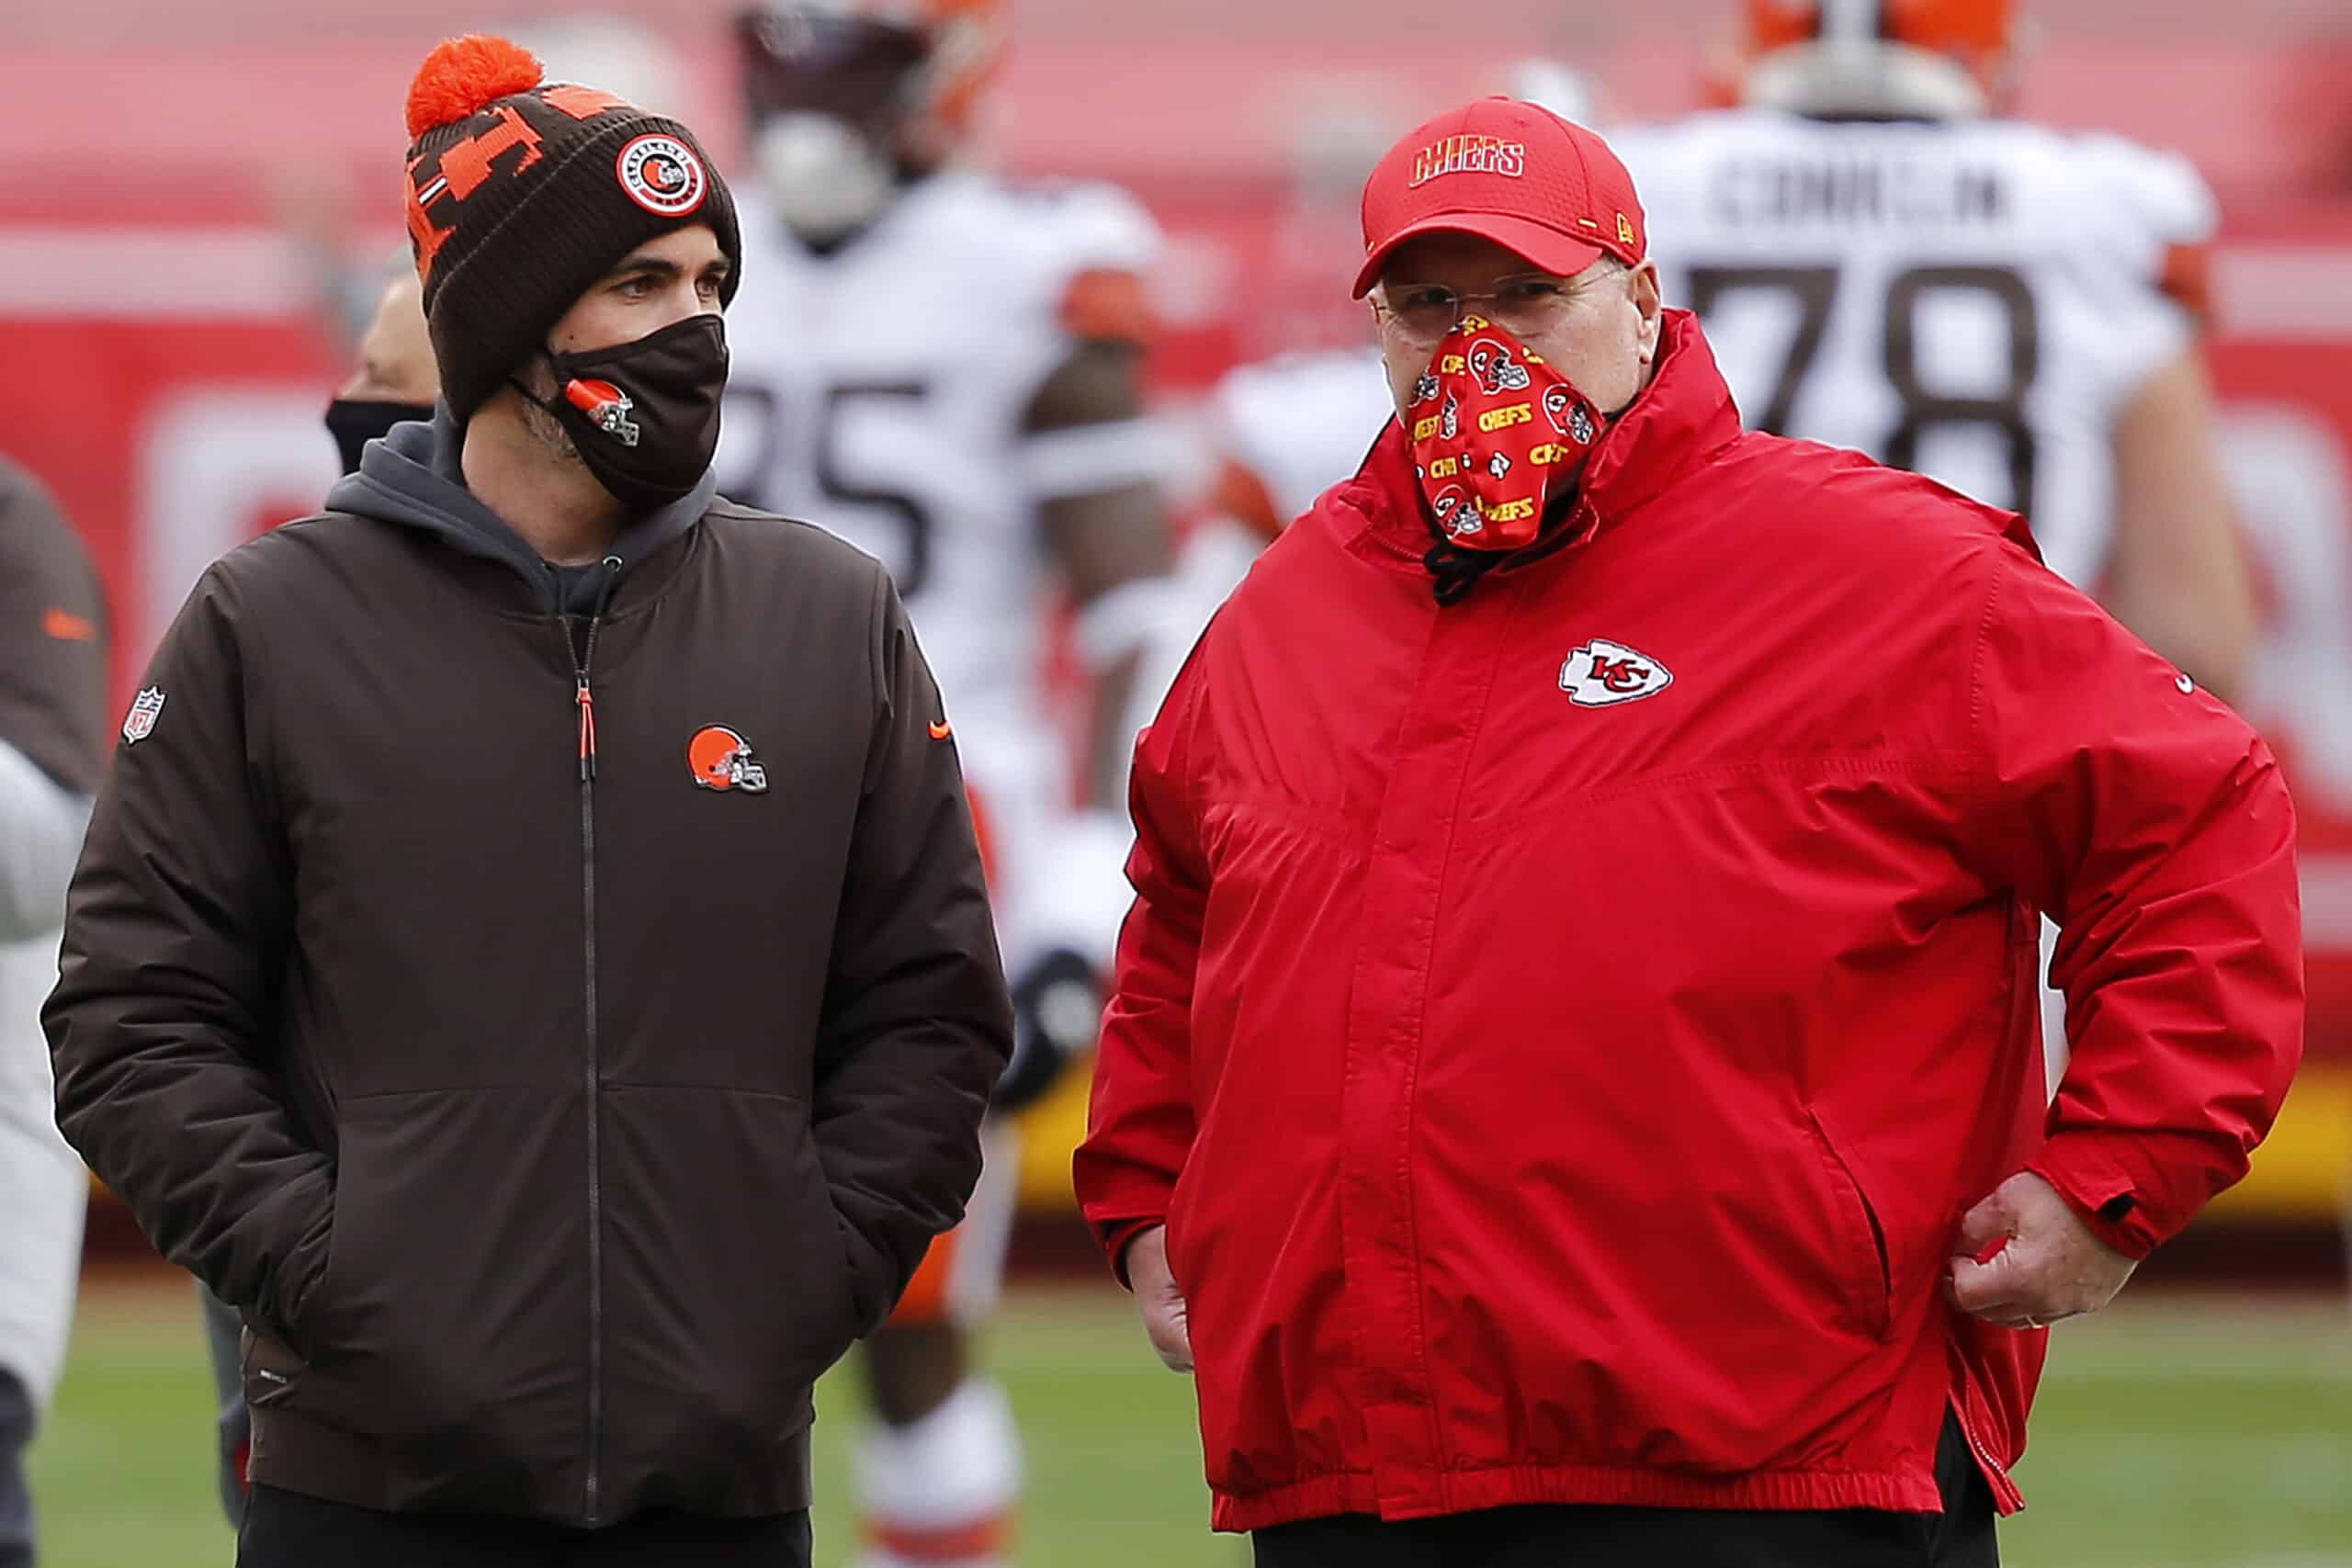 Head coach Kevin Stefanski of the Cleveland Browns and head coach Andy Reid of the Kansas City Chiefs talk on the field prior to the AFC Divisional Playoff game at Arrowhead Stadium on January 17, 2021 in Kansas City, Missouri.